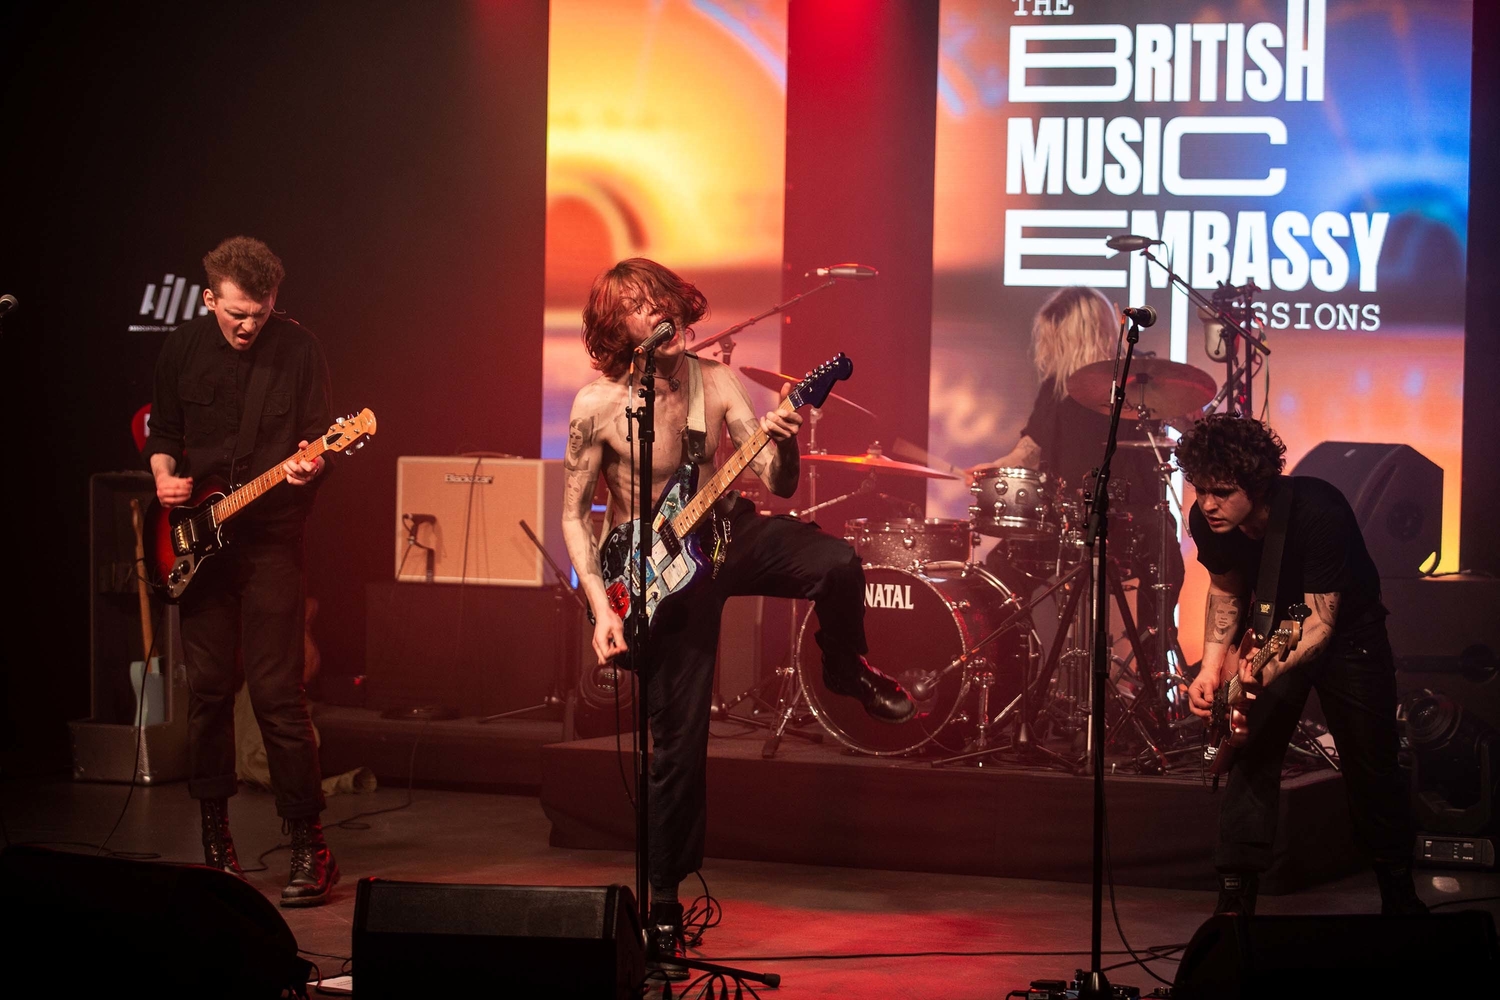 Relive King Nun’s entire live set for the British Music Embassy Sessions